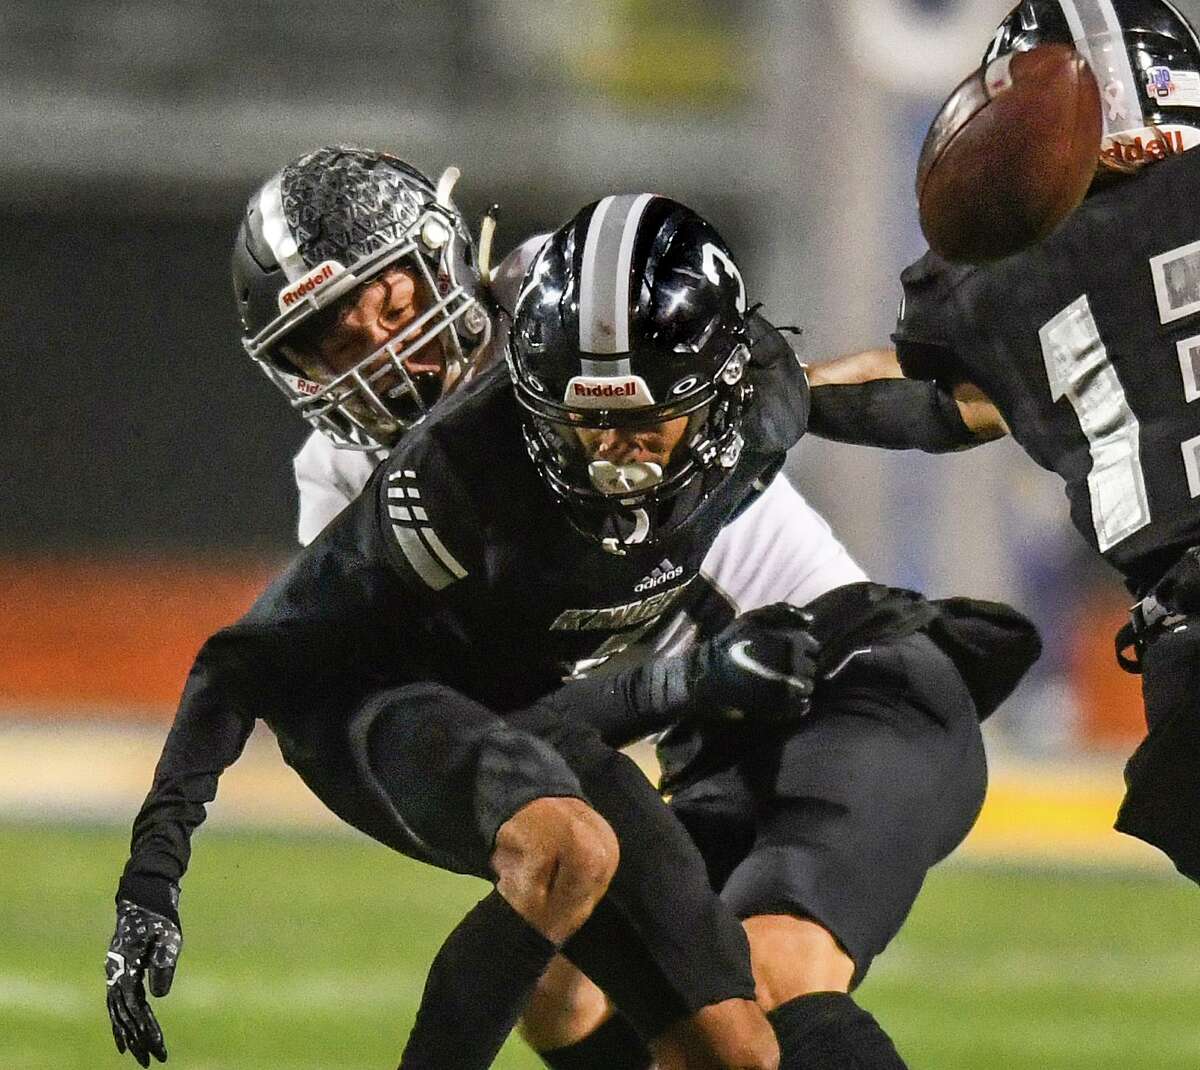 Receiver Edmarrion Contreras (3) of Steele has the ball knocked away by defensive back Jaxon Oliver of Vandegrift during area football playoffs action at Lehnhoff Stadium in Schertz on Friday, Nov. 19, 2021.